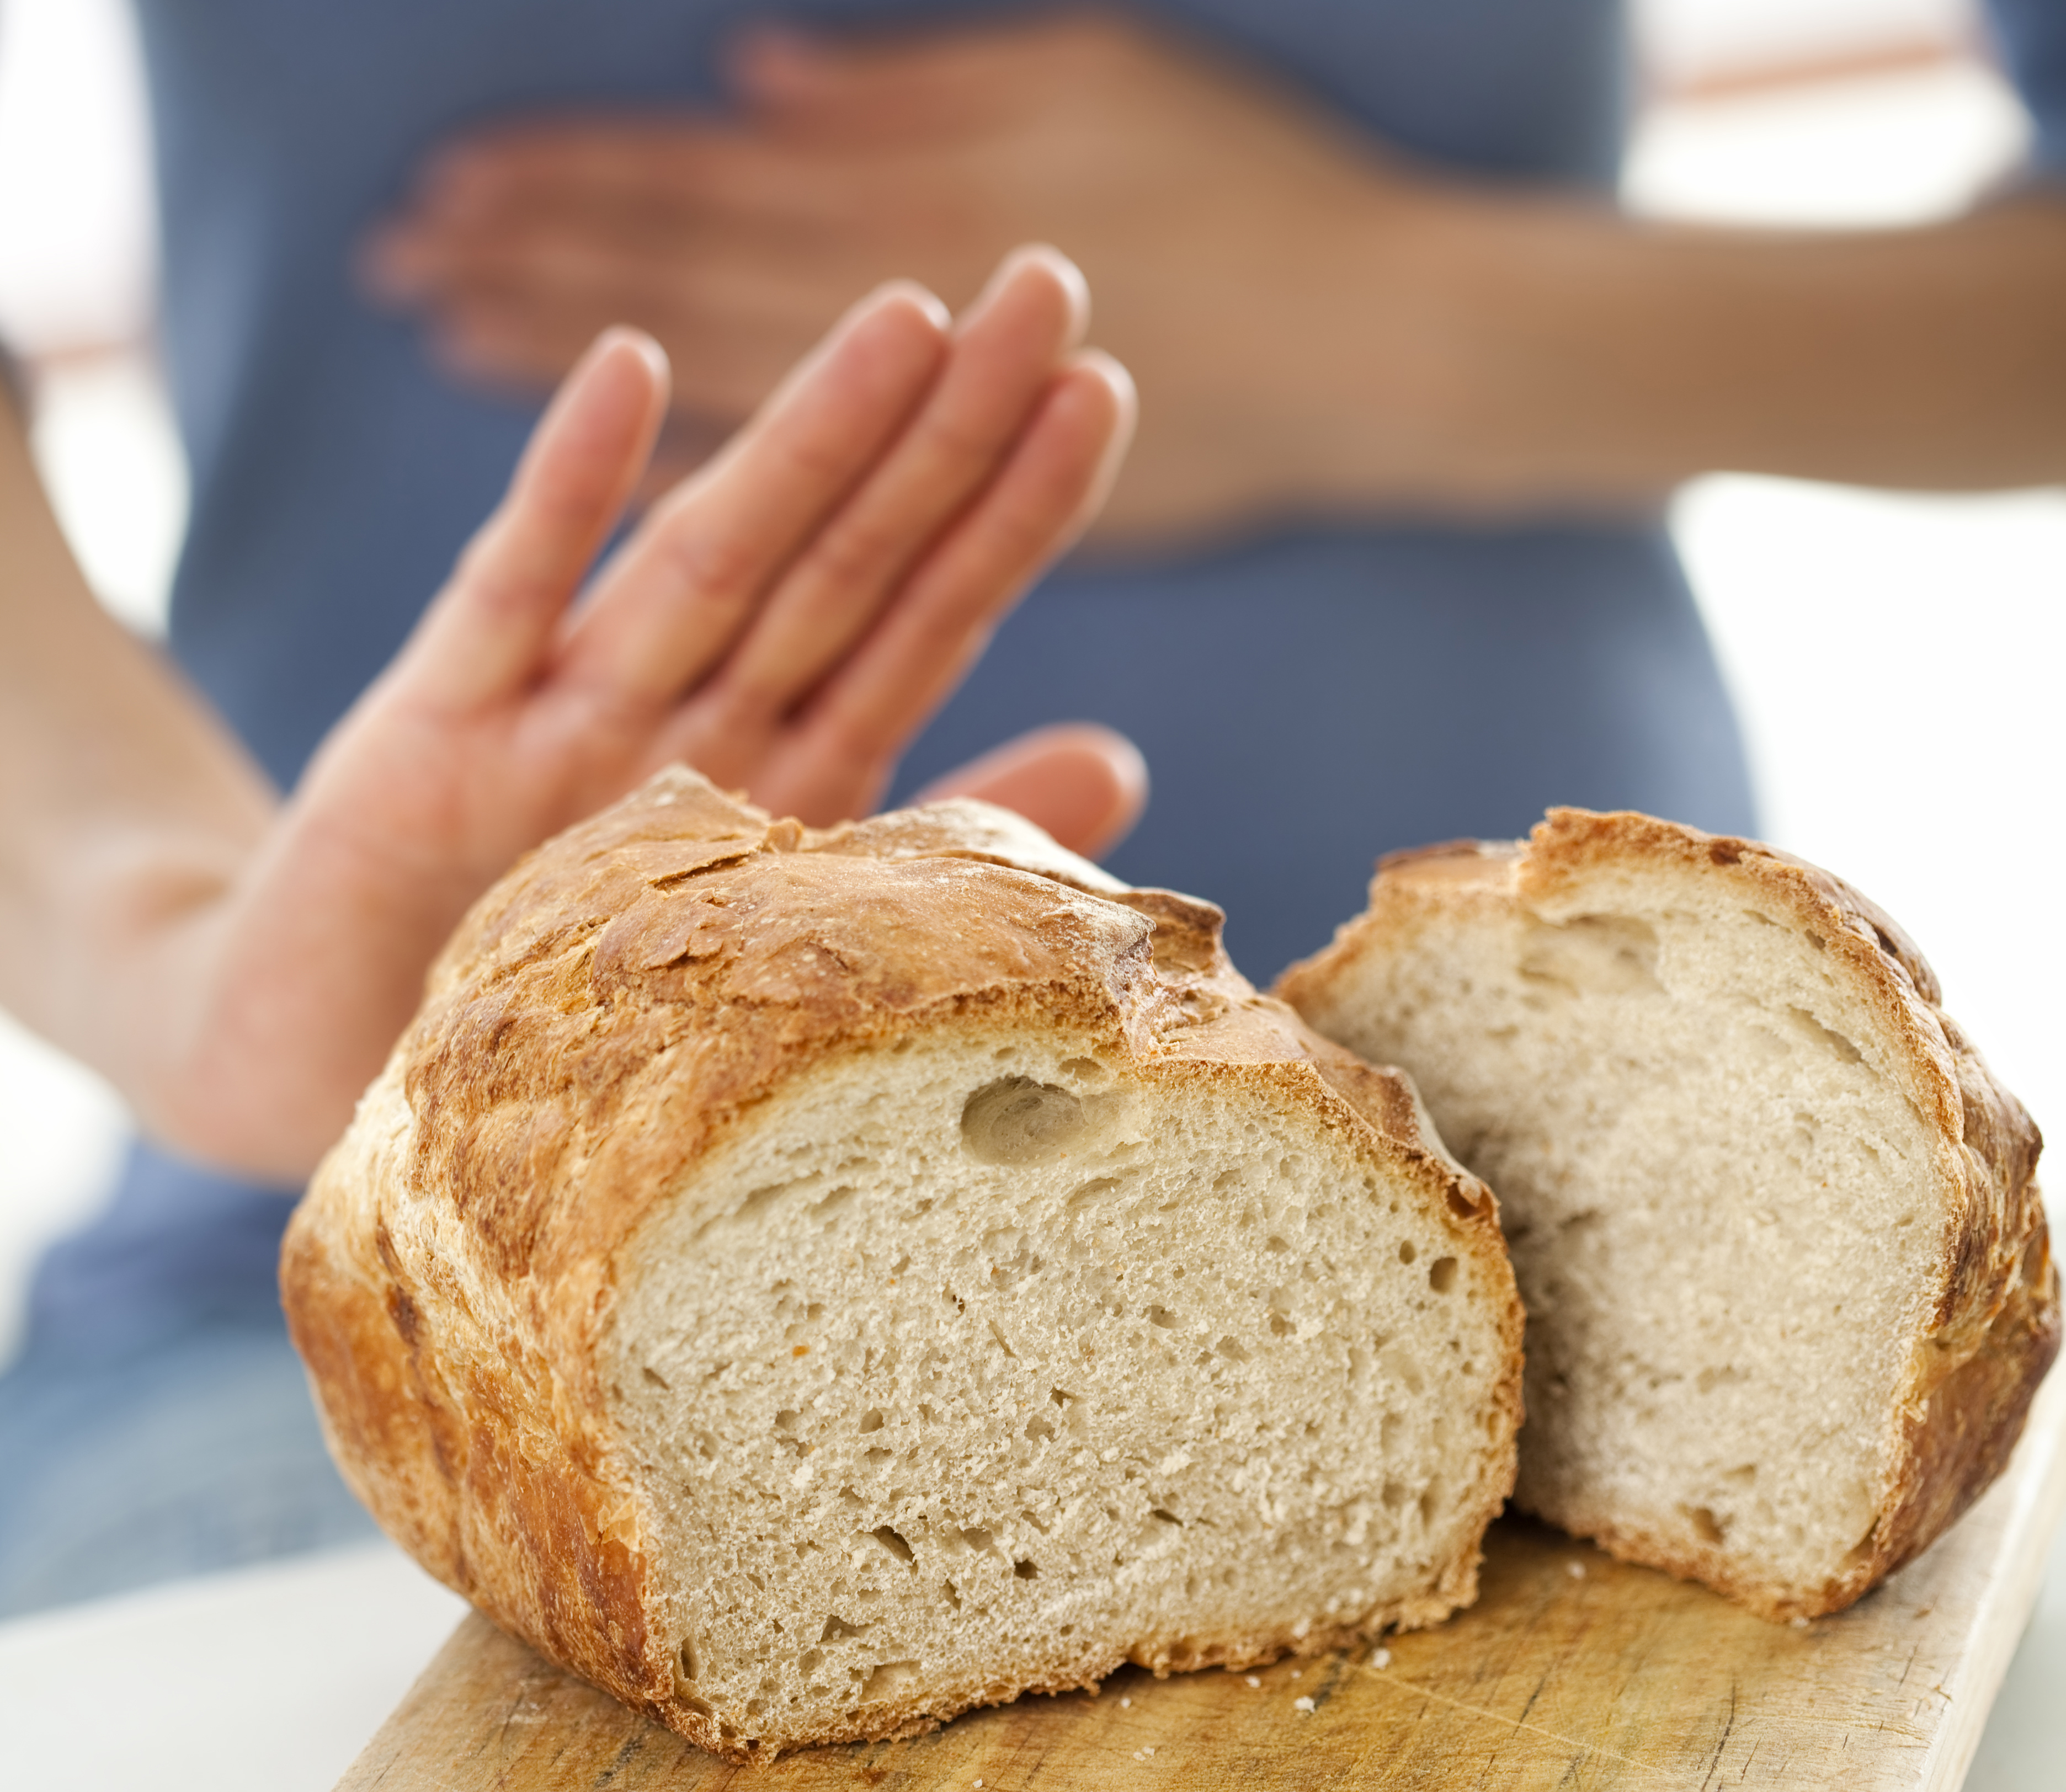 THE MAIN DISEASES ASSOCIATED WITH GLUTEN